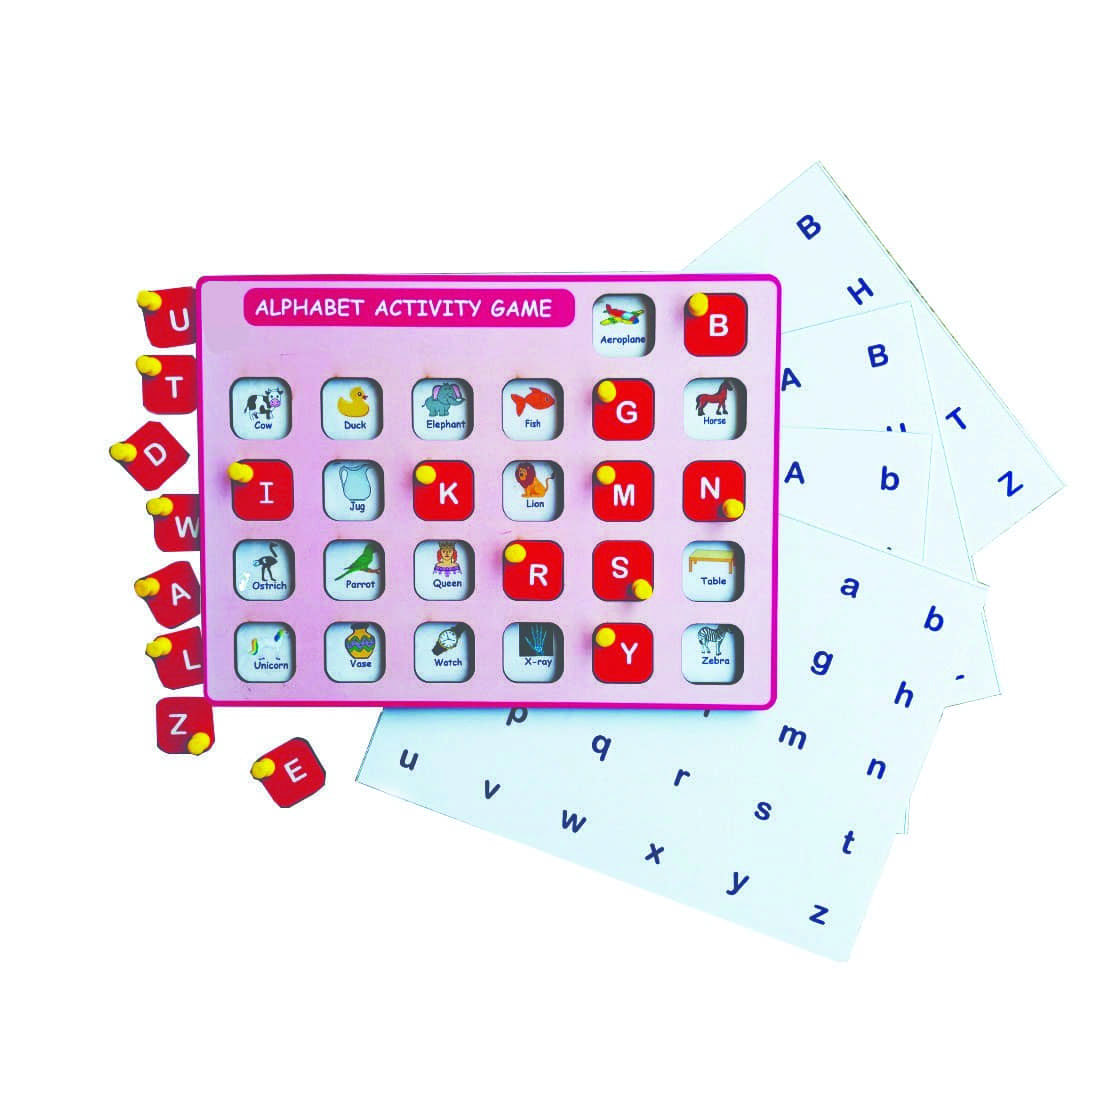 Alphabet Activity Game - Kids Learning Board Game have fun with Alphabets